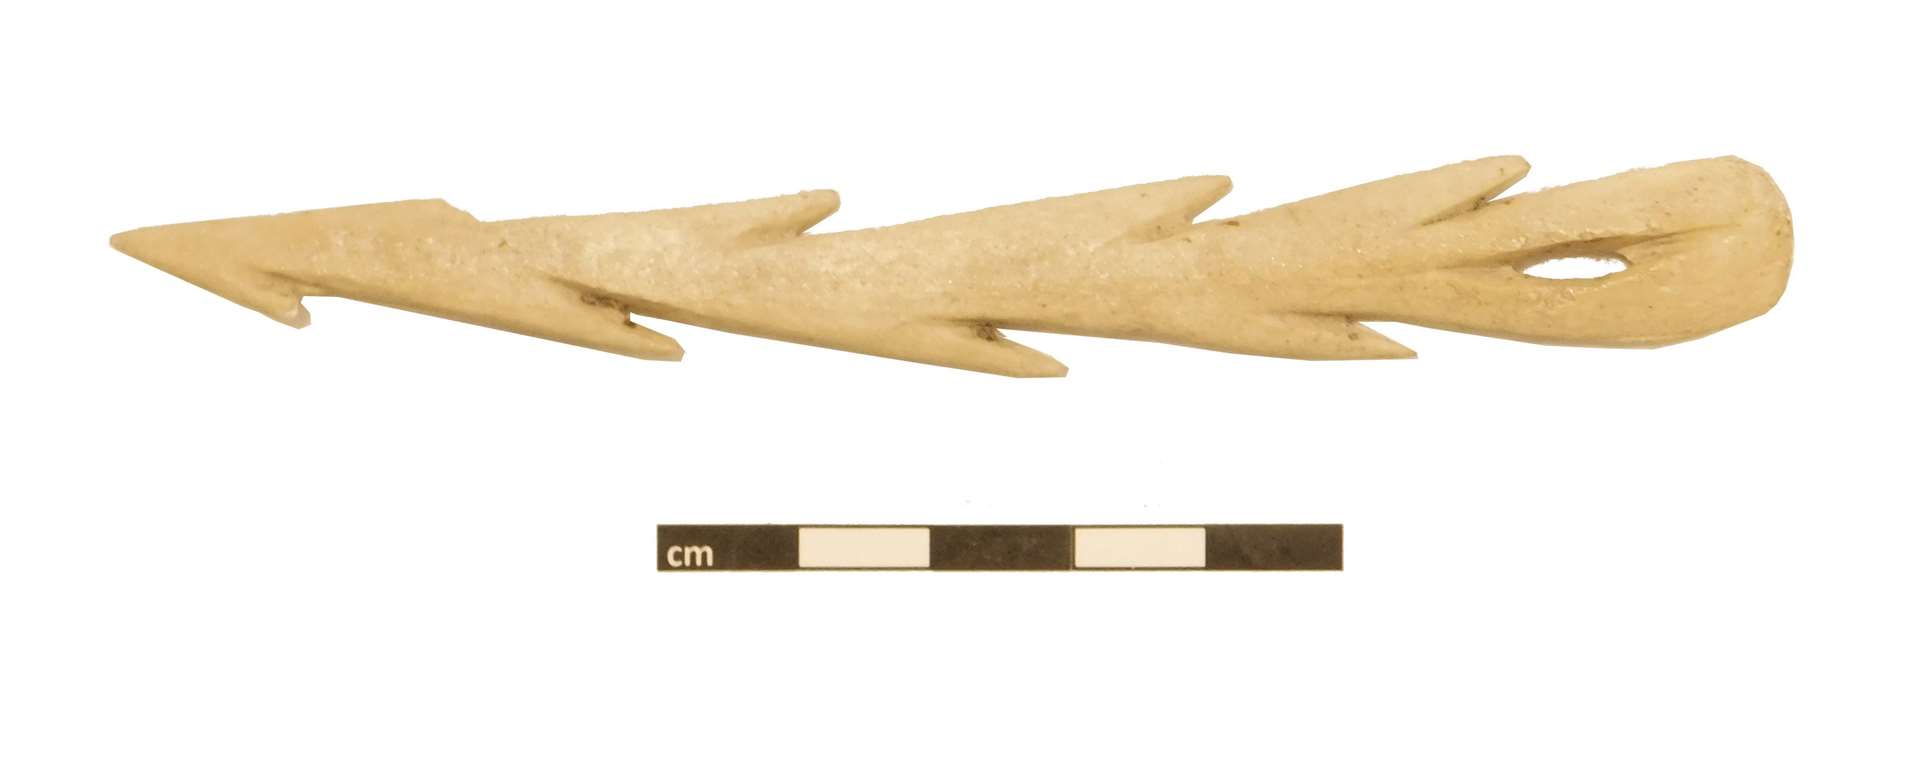 Mesolithic harpoon, Picture: Crown Office.